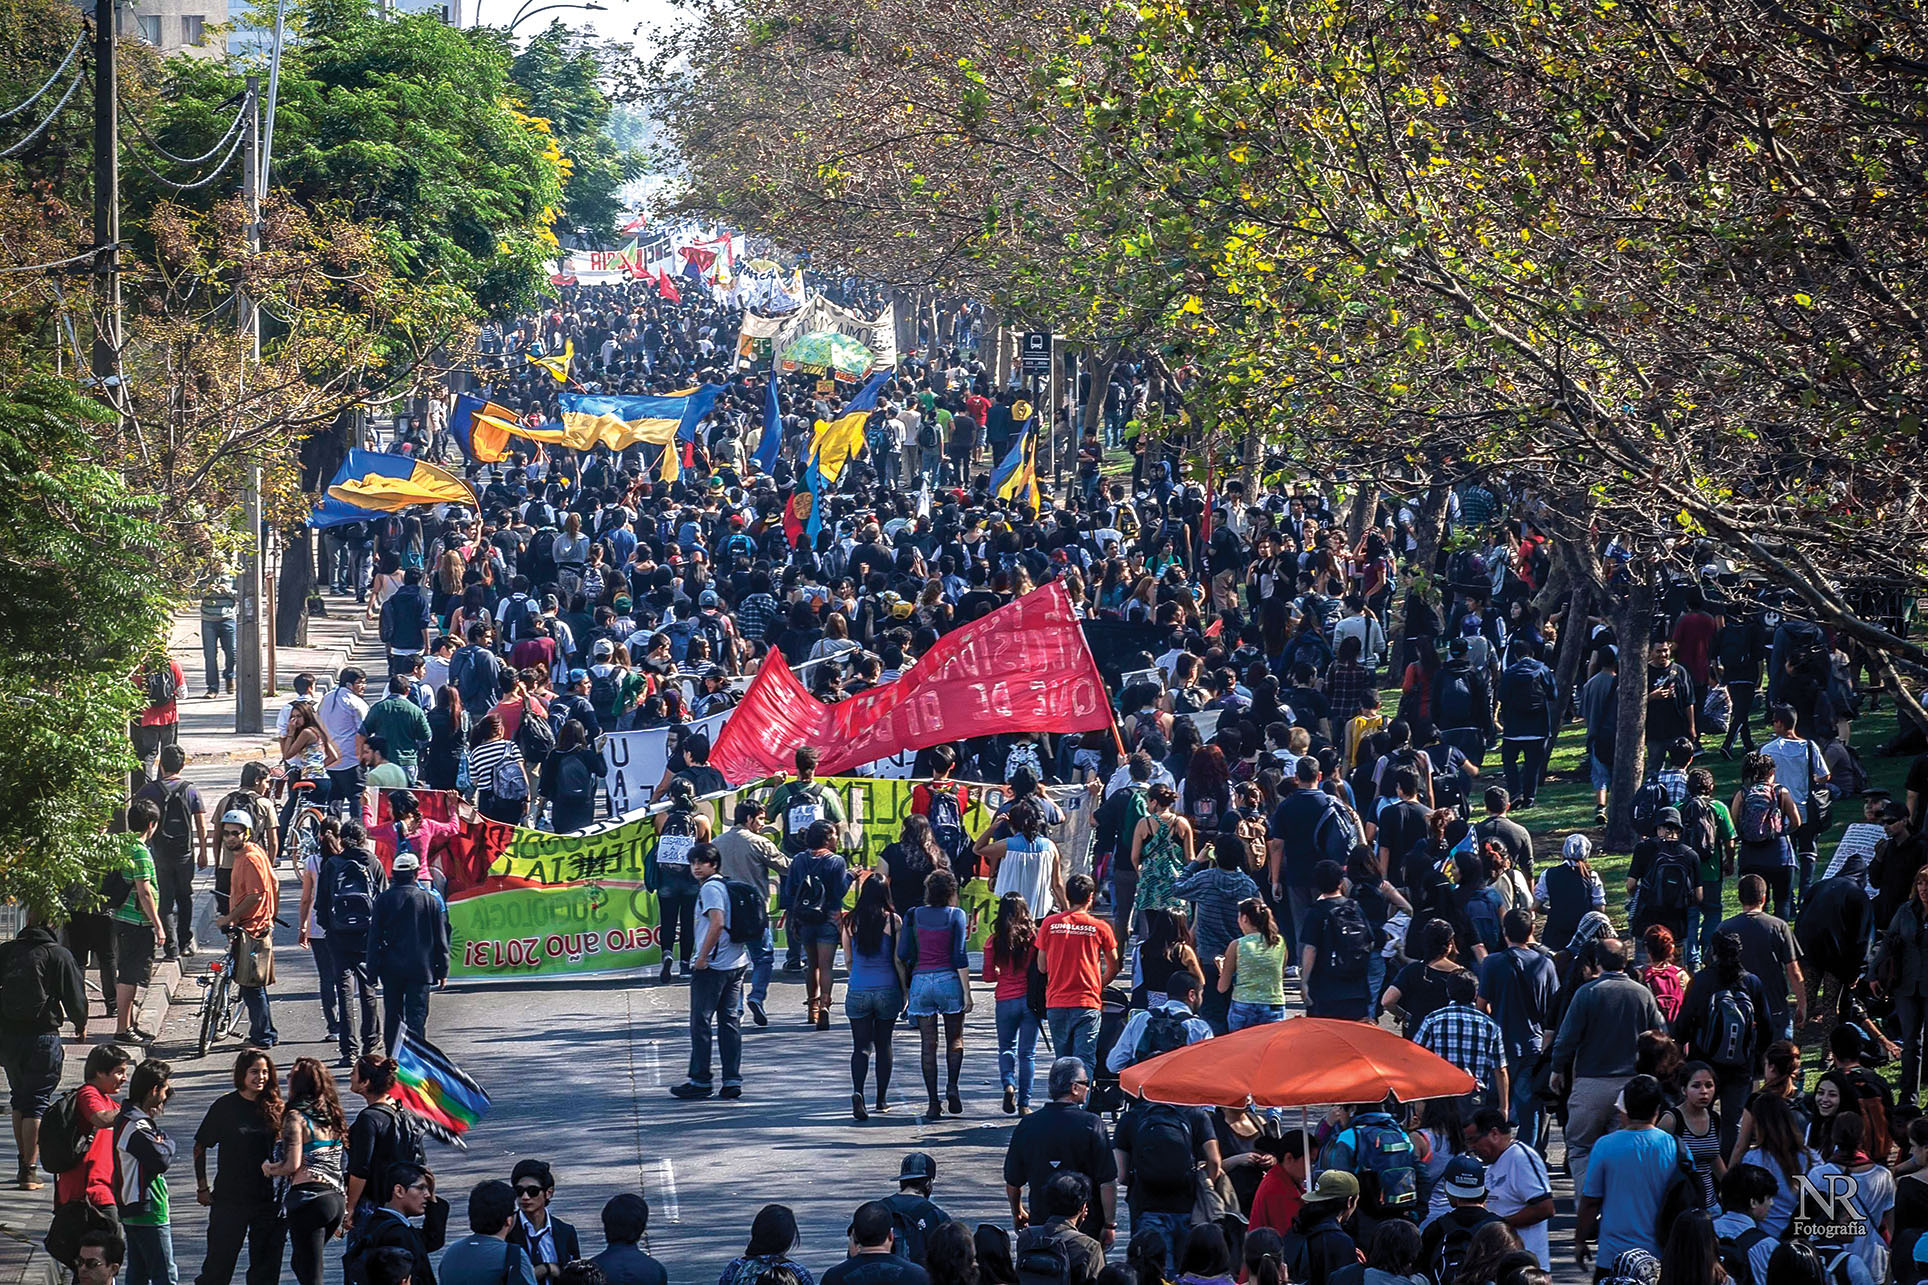 The Chilean student movement still generates energy, with a large crowd of protestors moving down a street inMay 2013. (Photo by Nicolás Robles Fritz.)